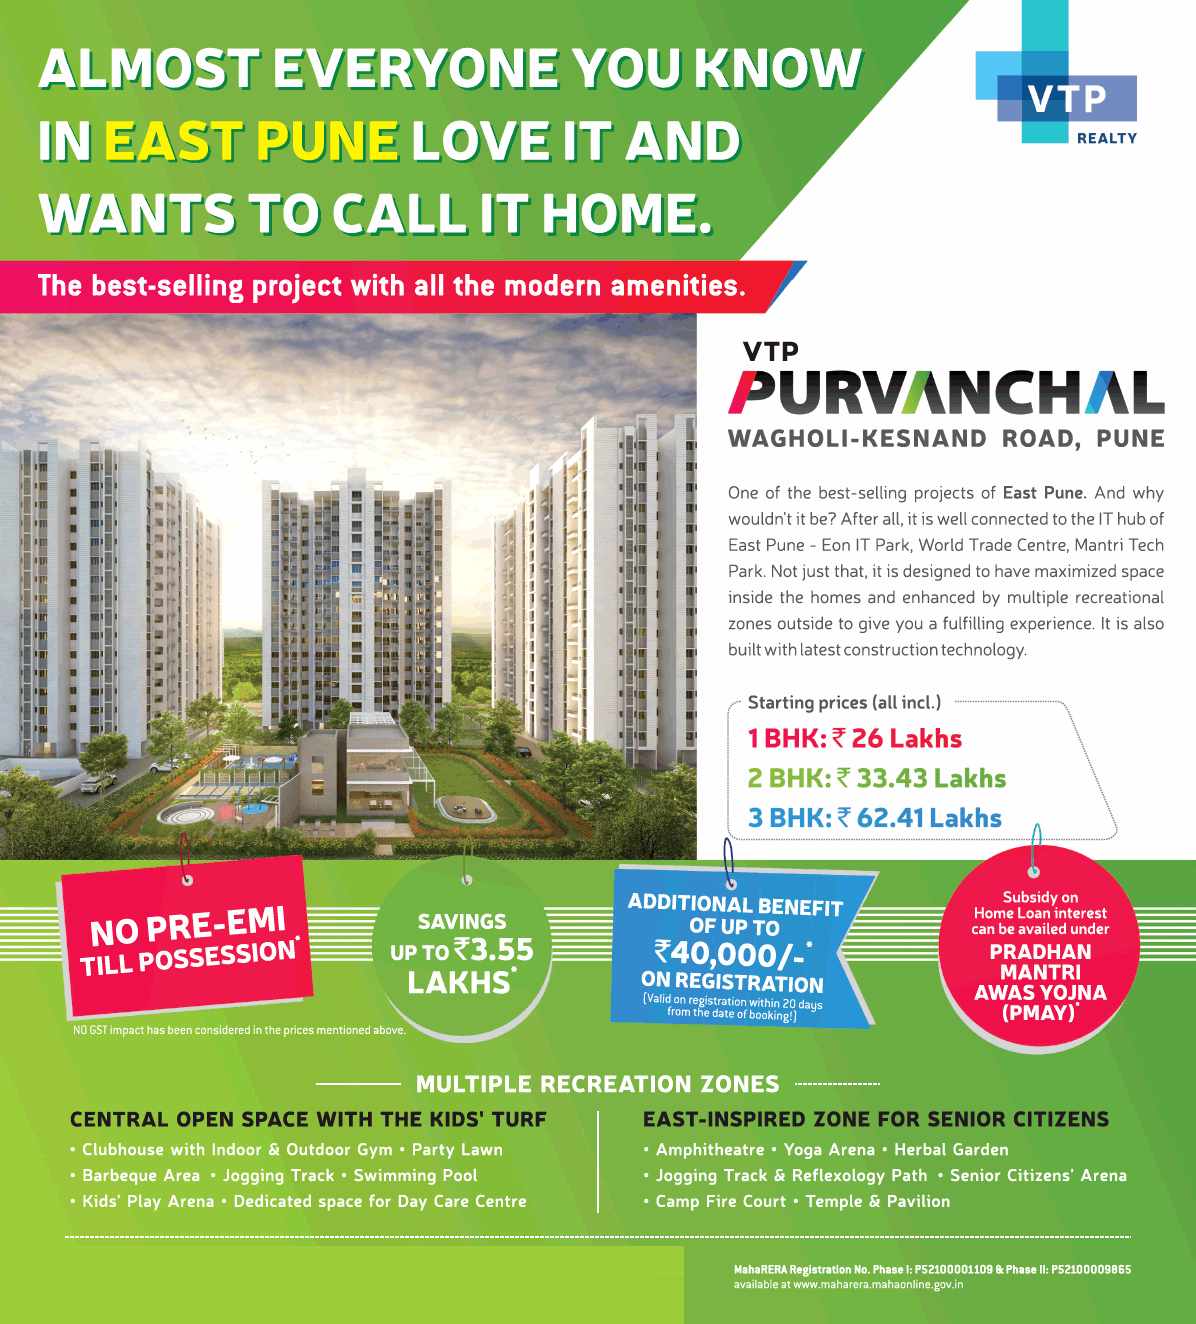 Live in the best selling project with all modern amenities at VTP Purvanchal in Pune Update